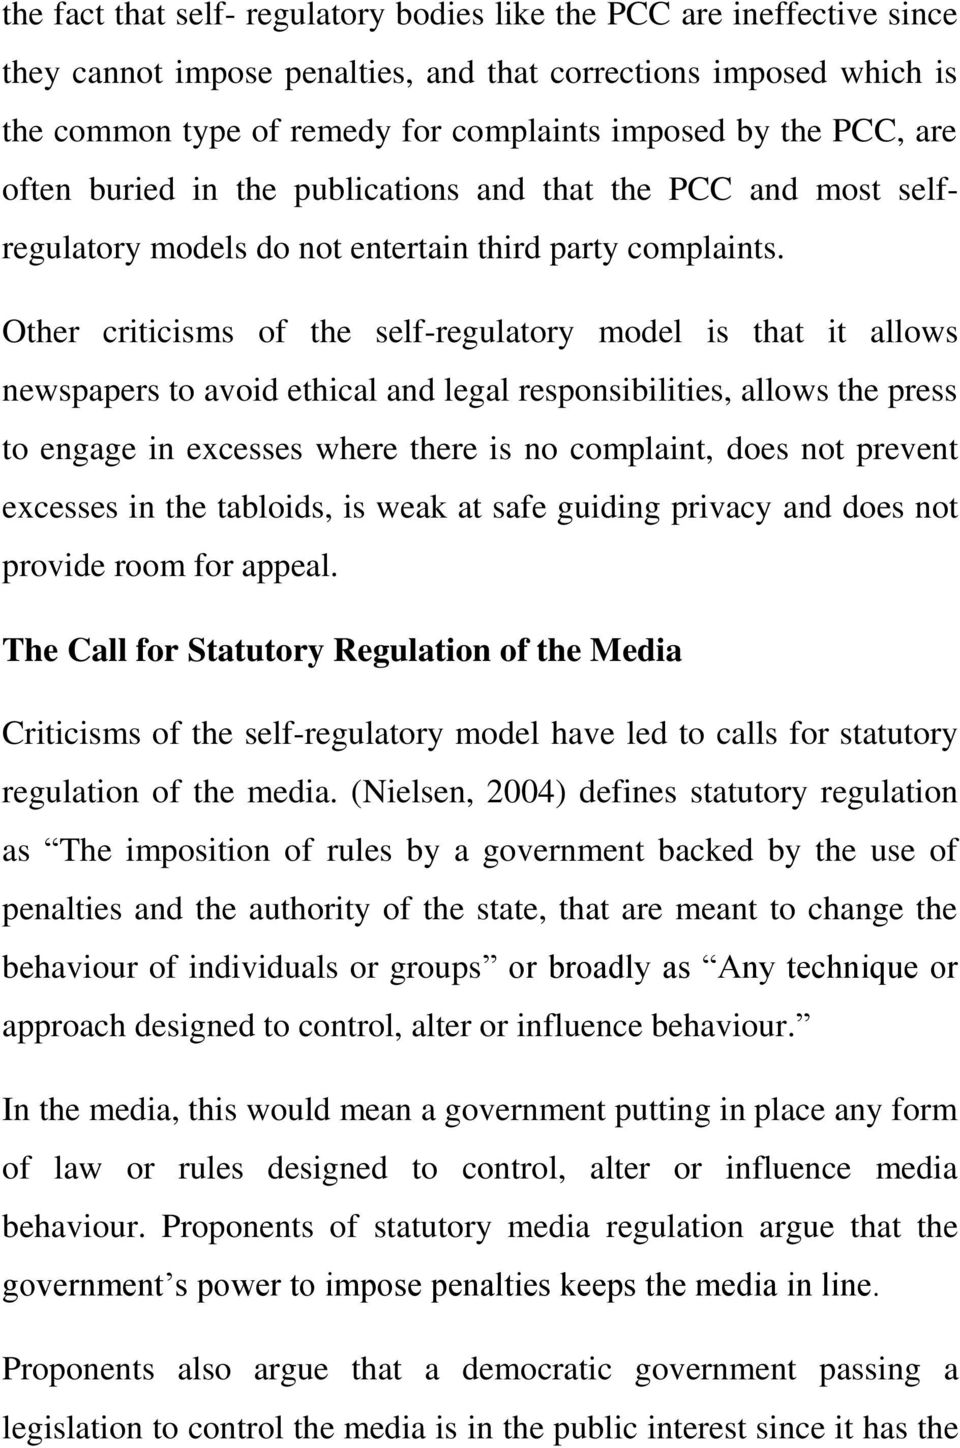 Other criticisms of the self-regulatory model is that it allows newspapers to avoid ethical and legal responsibilities, allows the press to engage in excesses where there is no complaint, does not